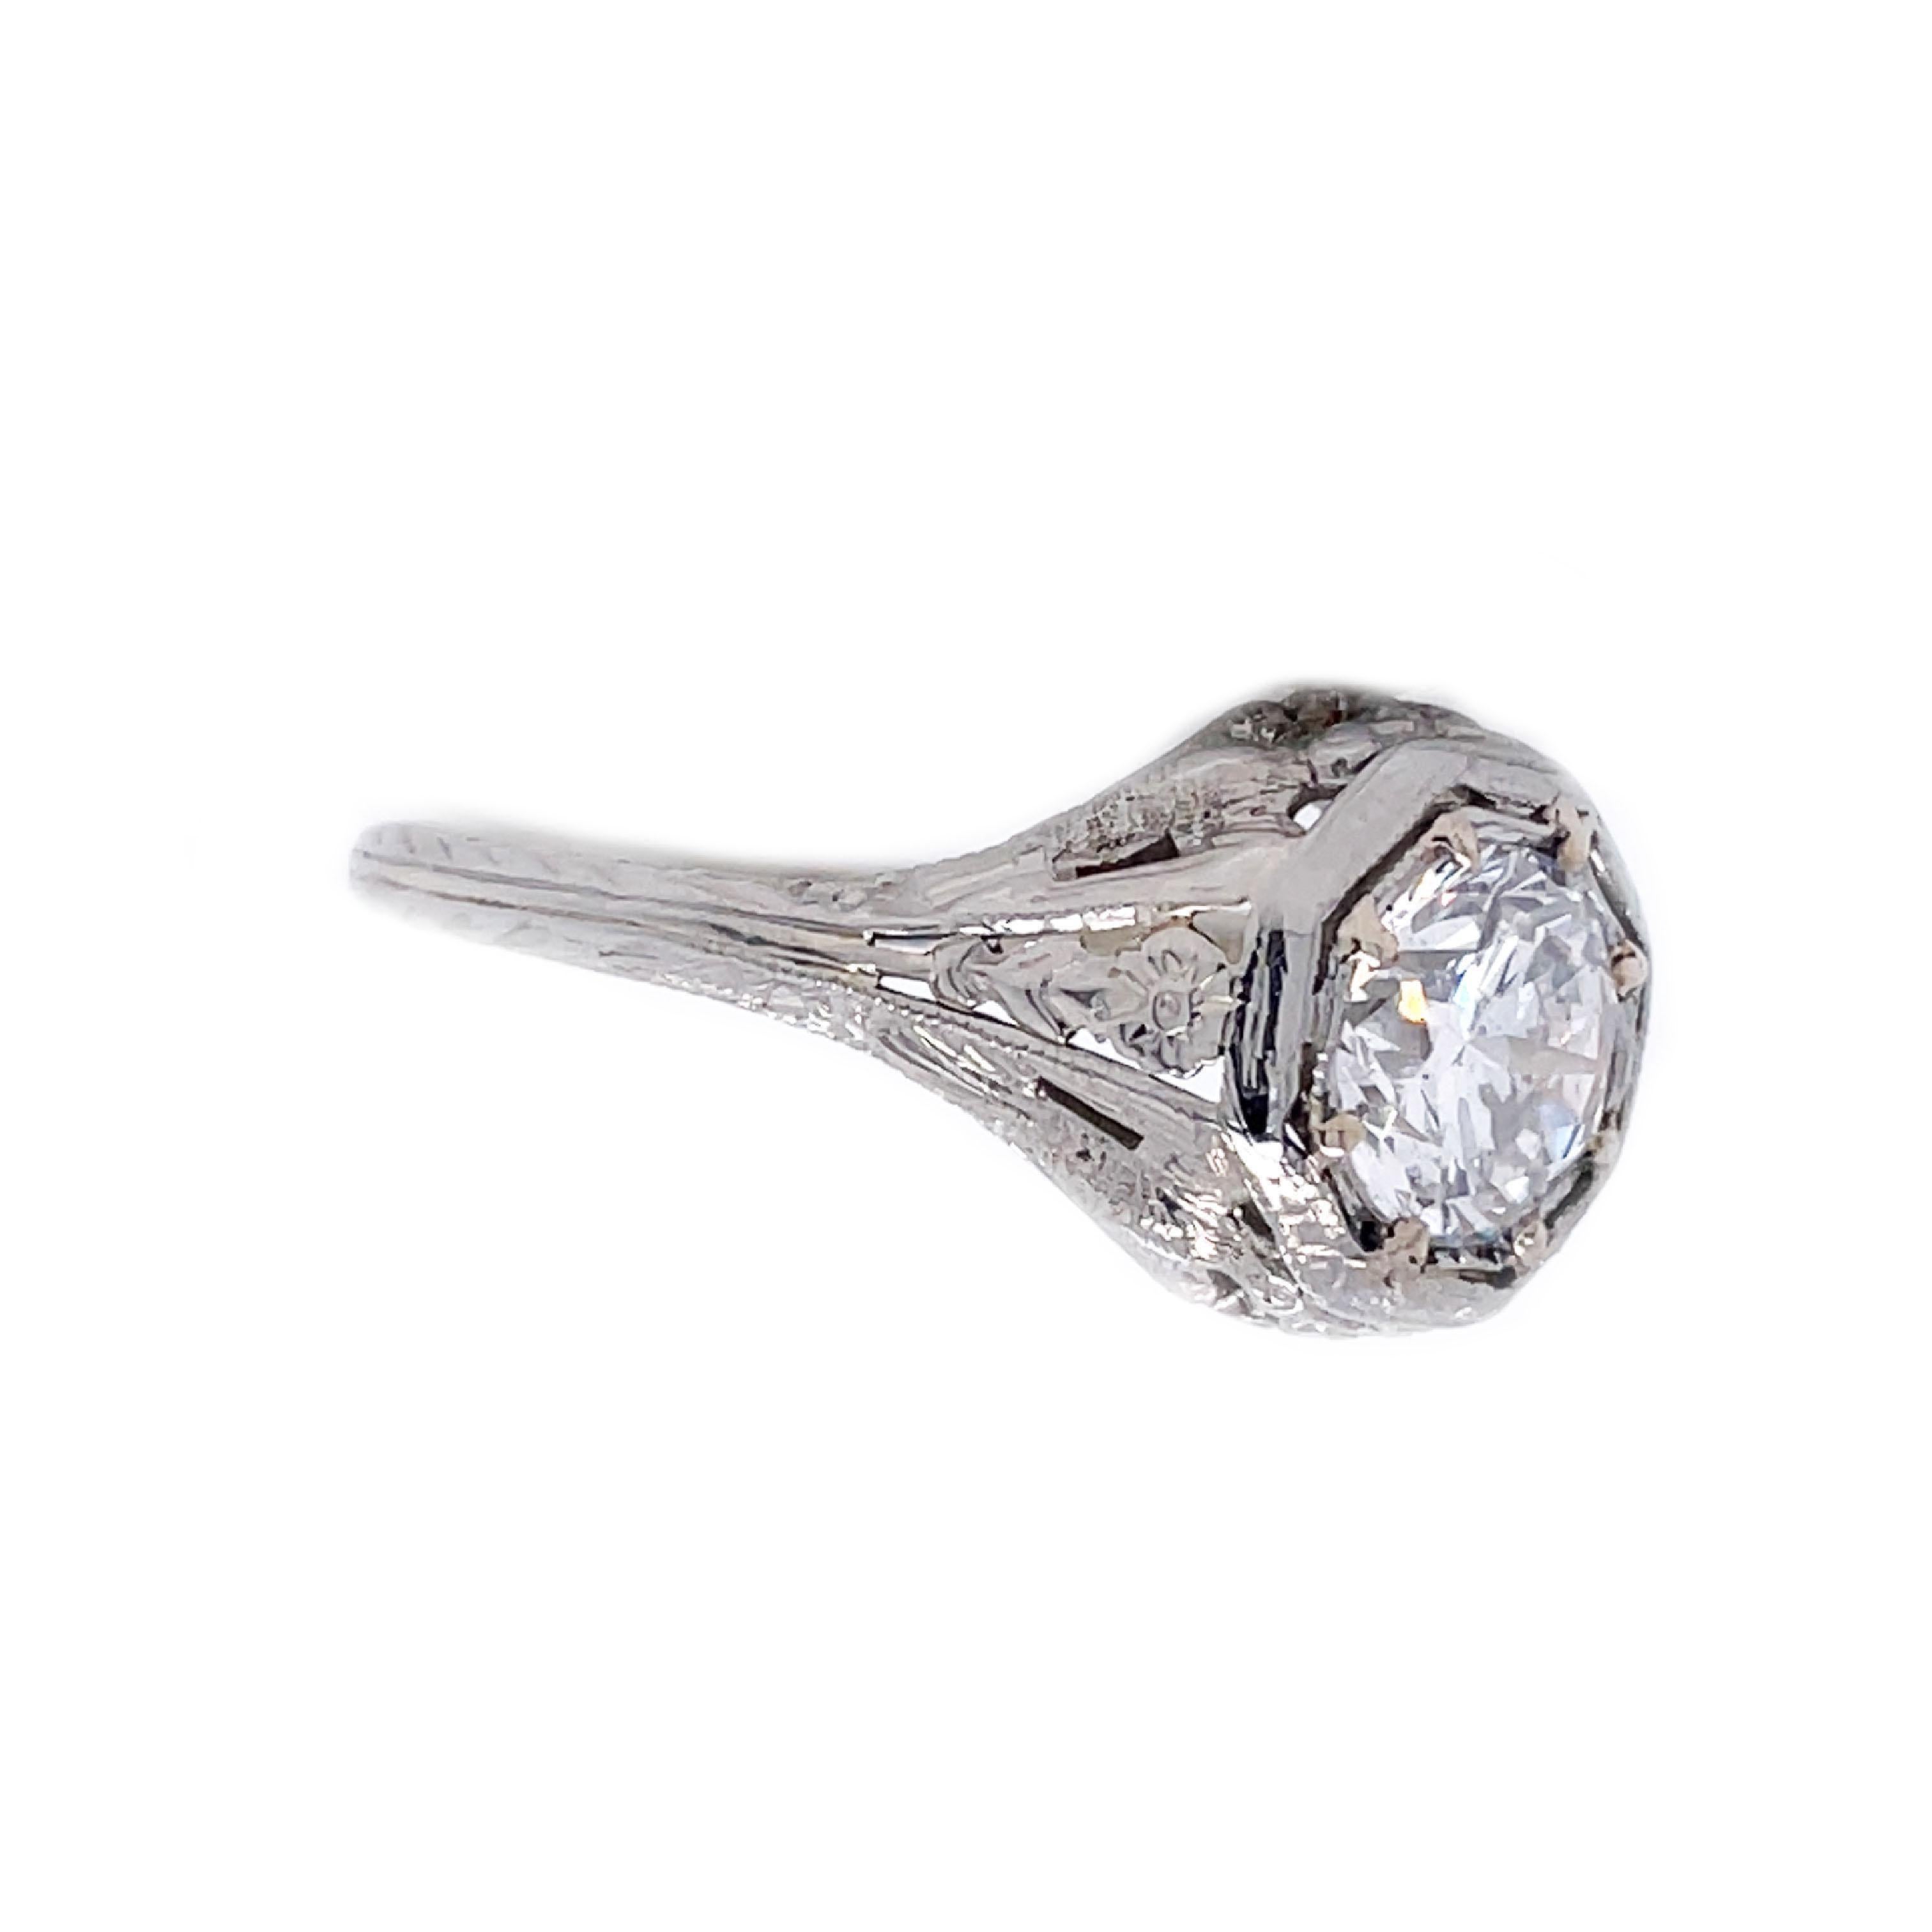 1920s 18K White Gold Filigree Diamond Love Bird Ring with GIA Report In Excellent Condition For Sale In Lexington, KY